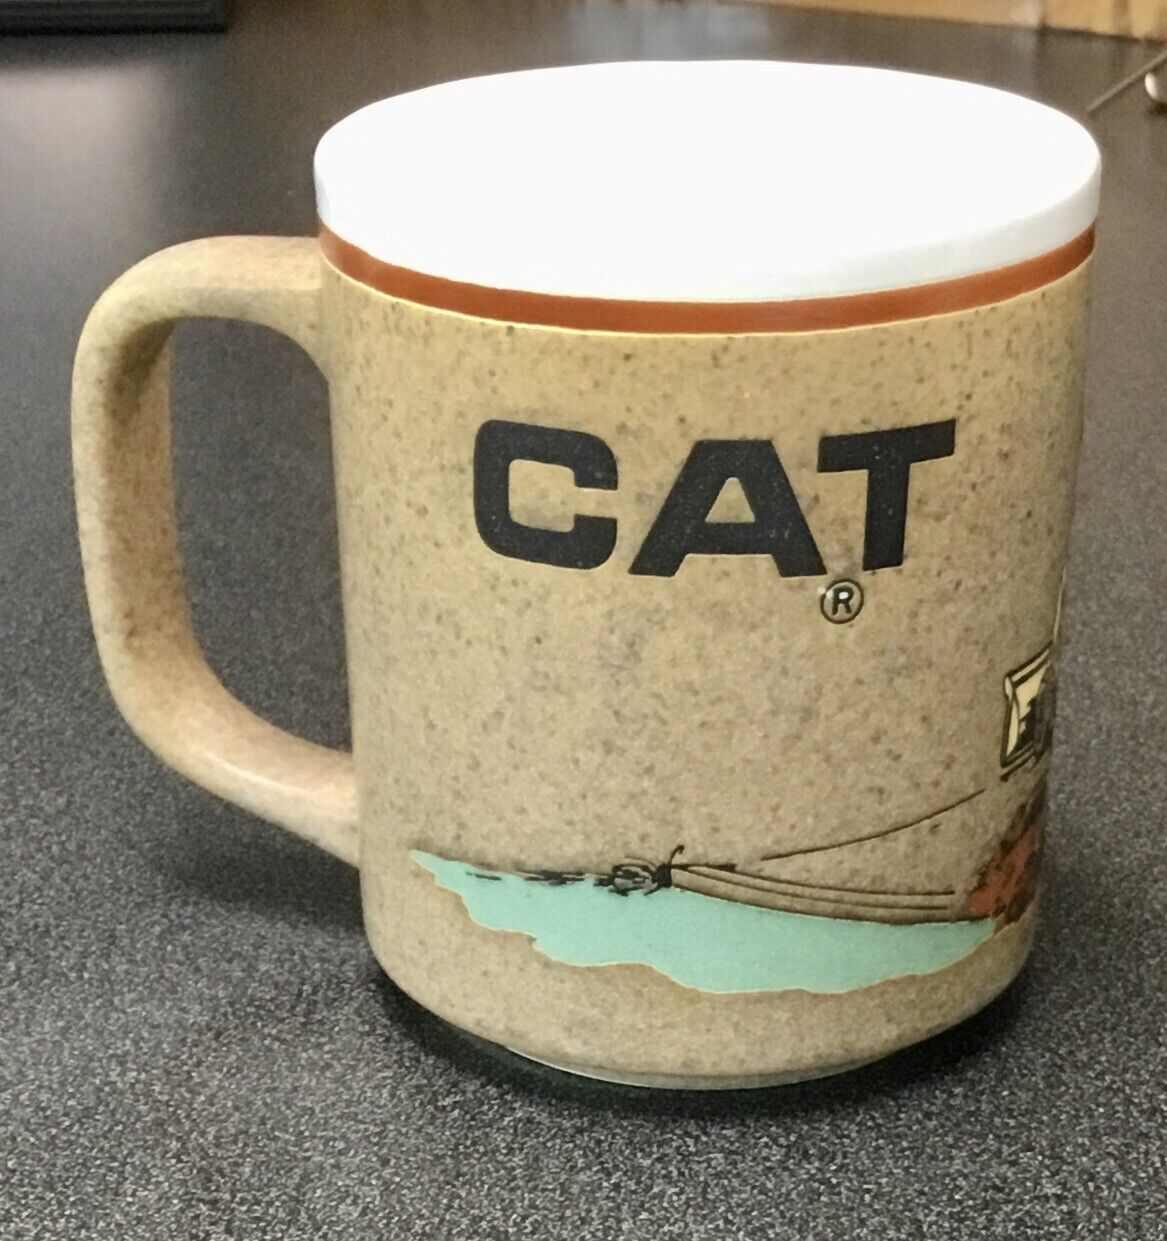 🔥RARE/HTF/VINTAGE- CAT Coffee Mug Cup Licensed Products of Caterpillar INC🔥